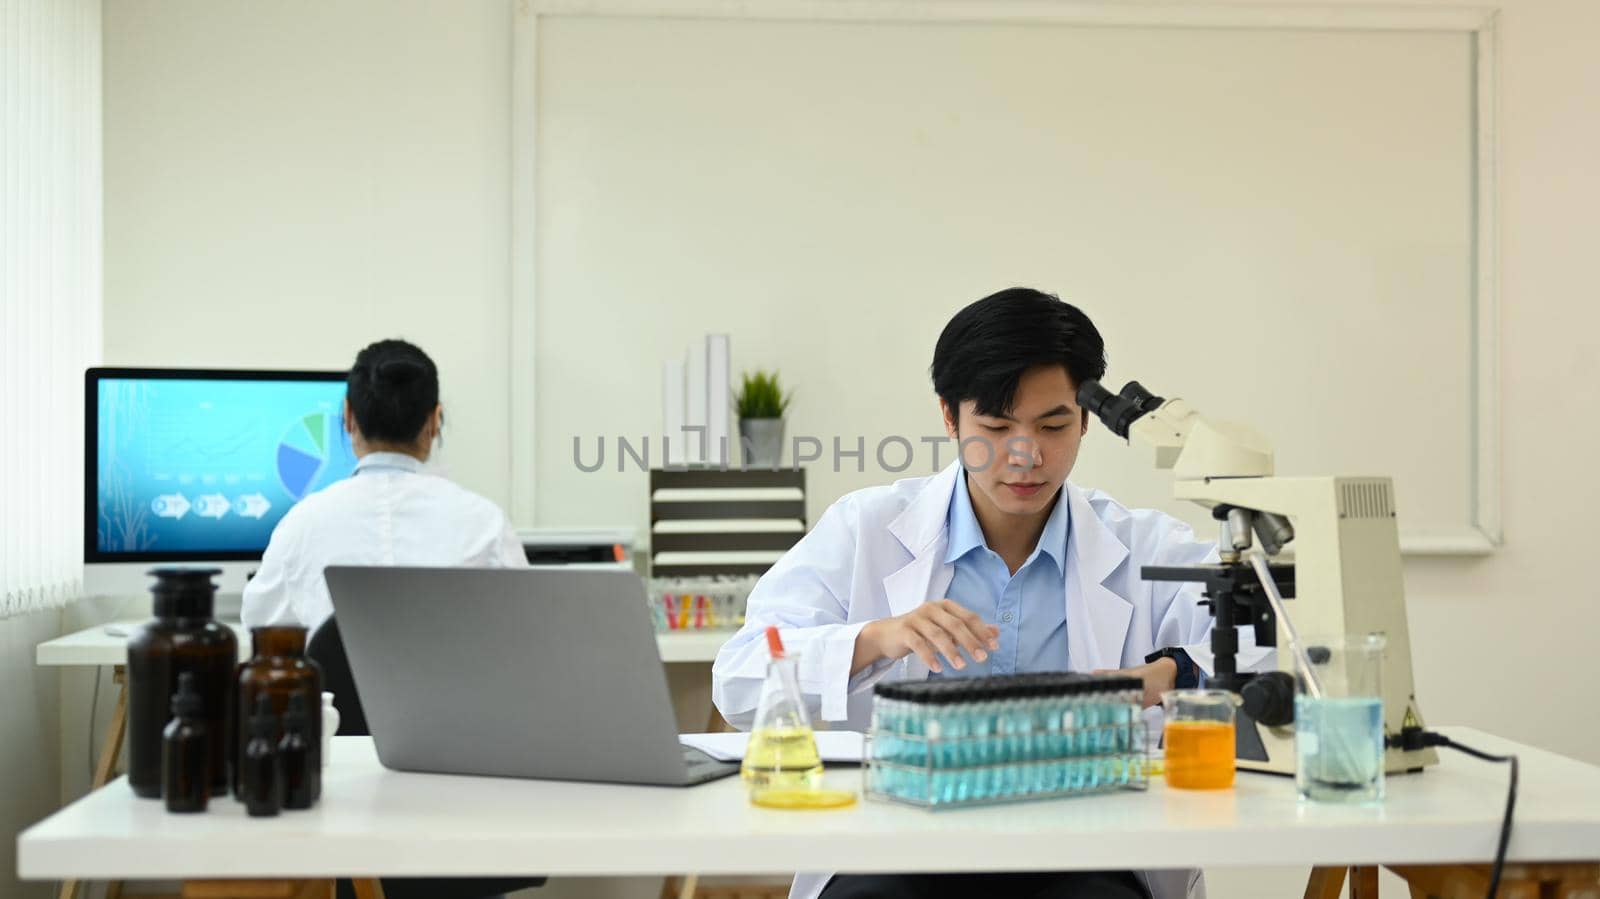 Biotechnology specialist team conducting experiment in a laboratory. Concepts of medicine and science researching.